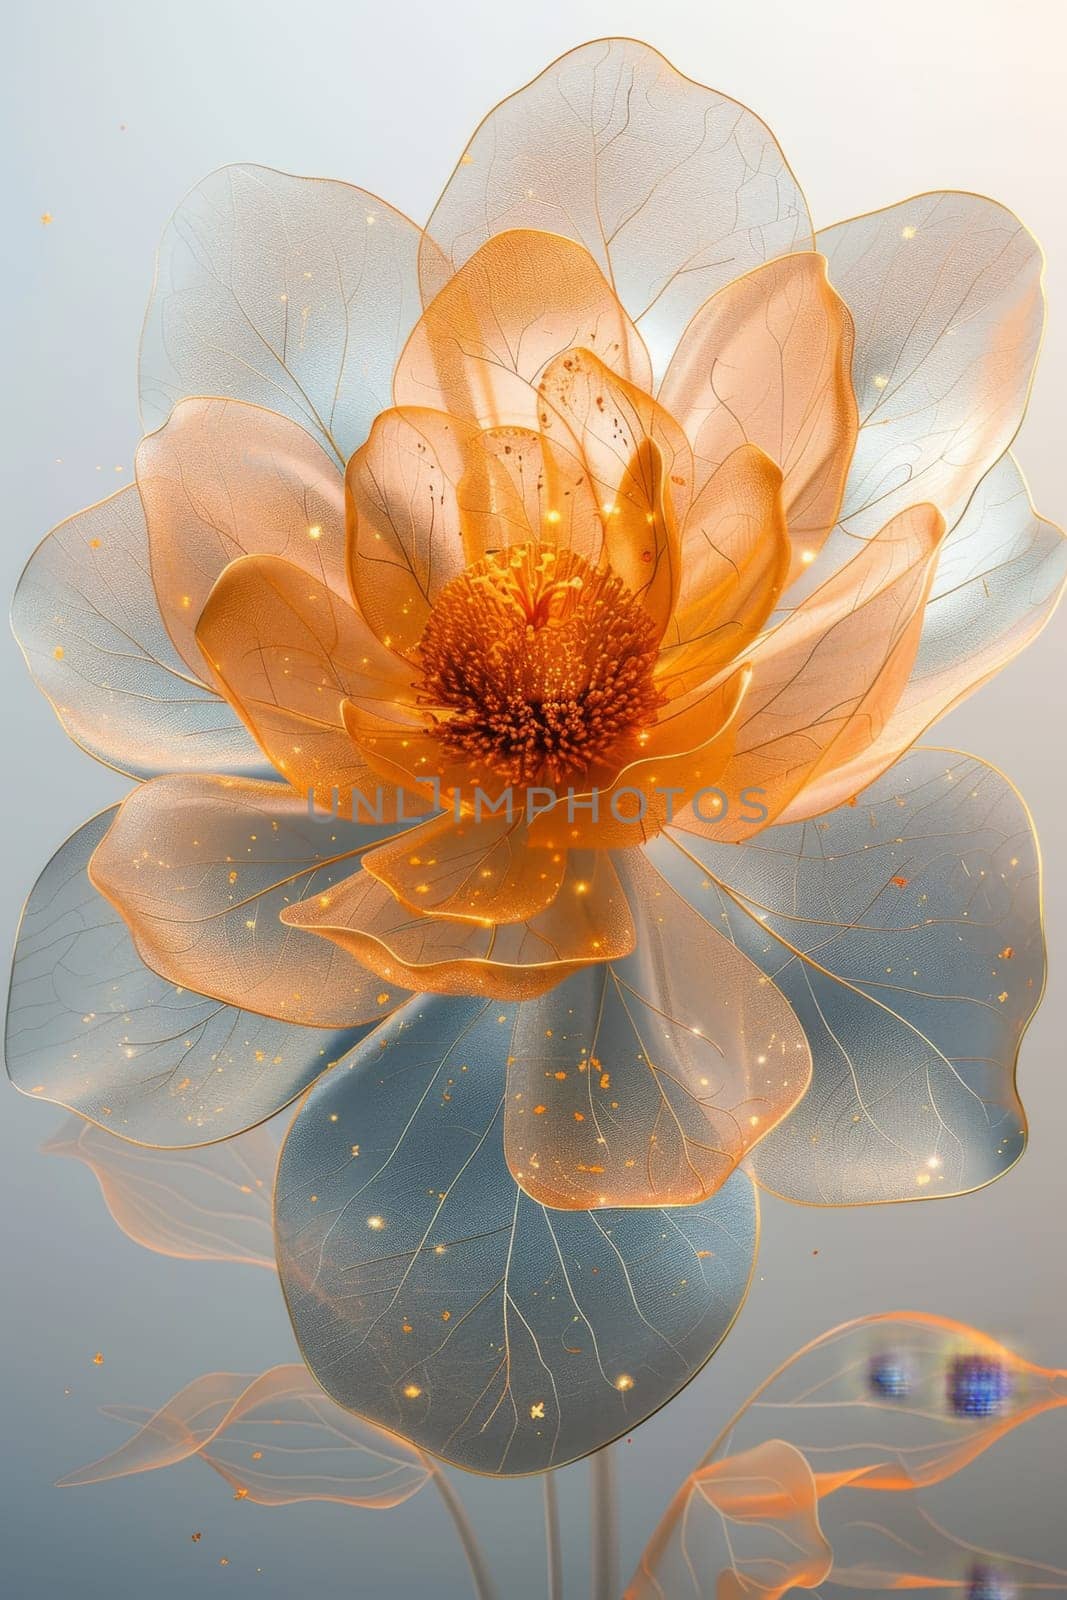 A magical orange flower with petals on a white background by Lobachad